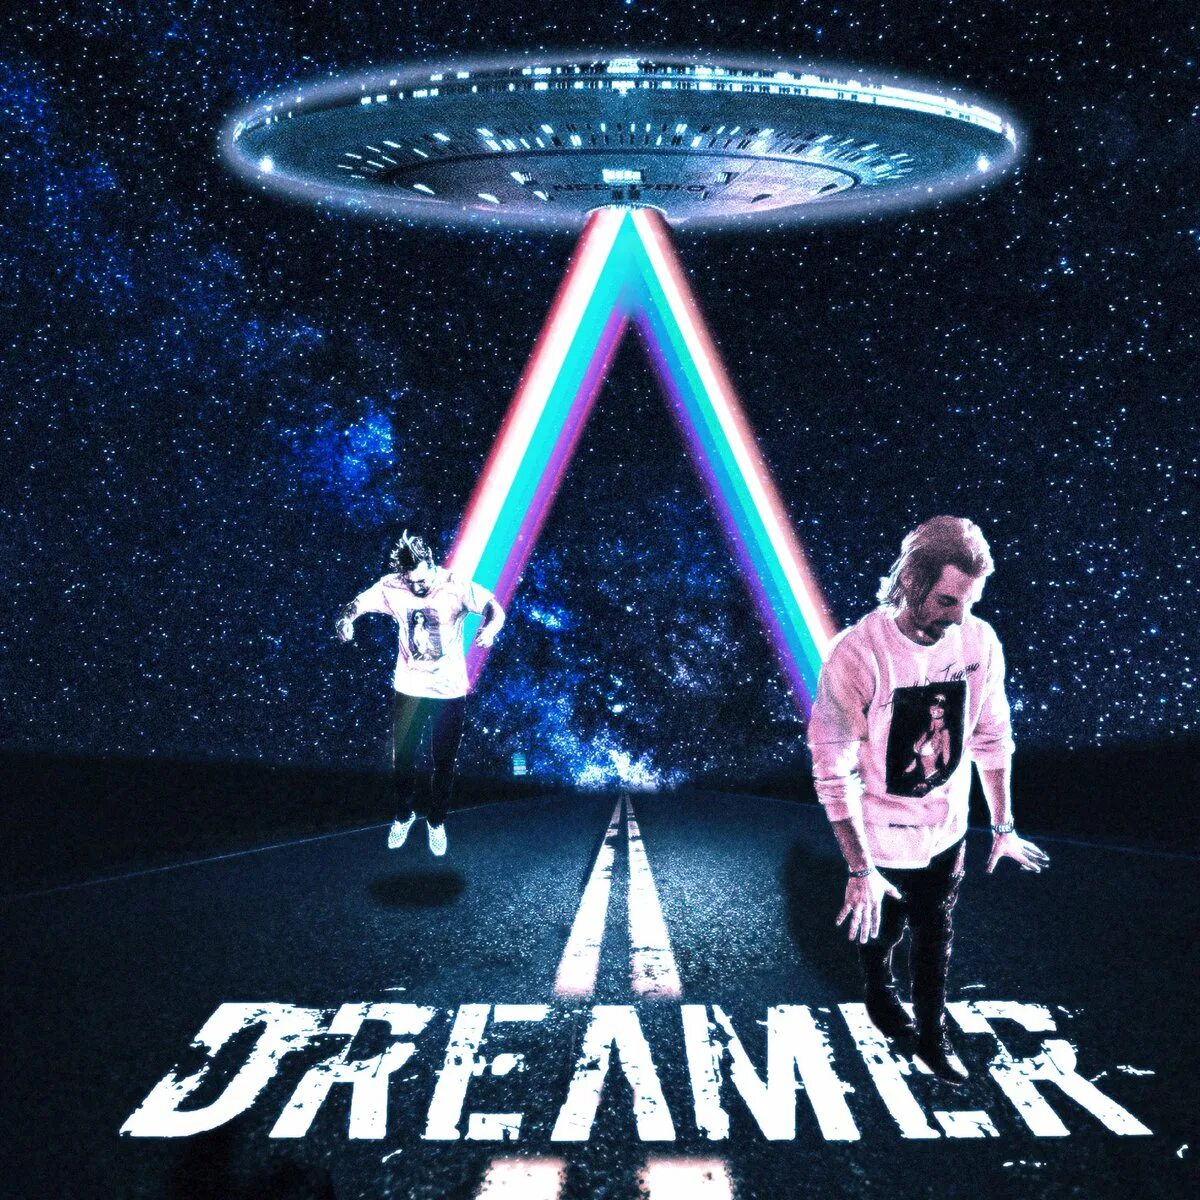 Axwell ingrosso Dreamer. Renegade Axwell /\ ingrosso. Axwell ingrosso Sigala Dreamer. Axwell ingrosso thinking about you. Axwell more than you